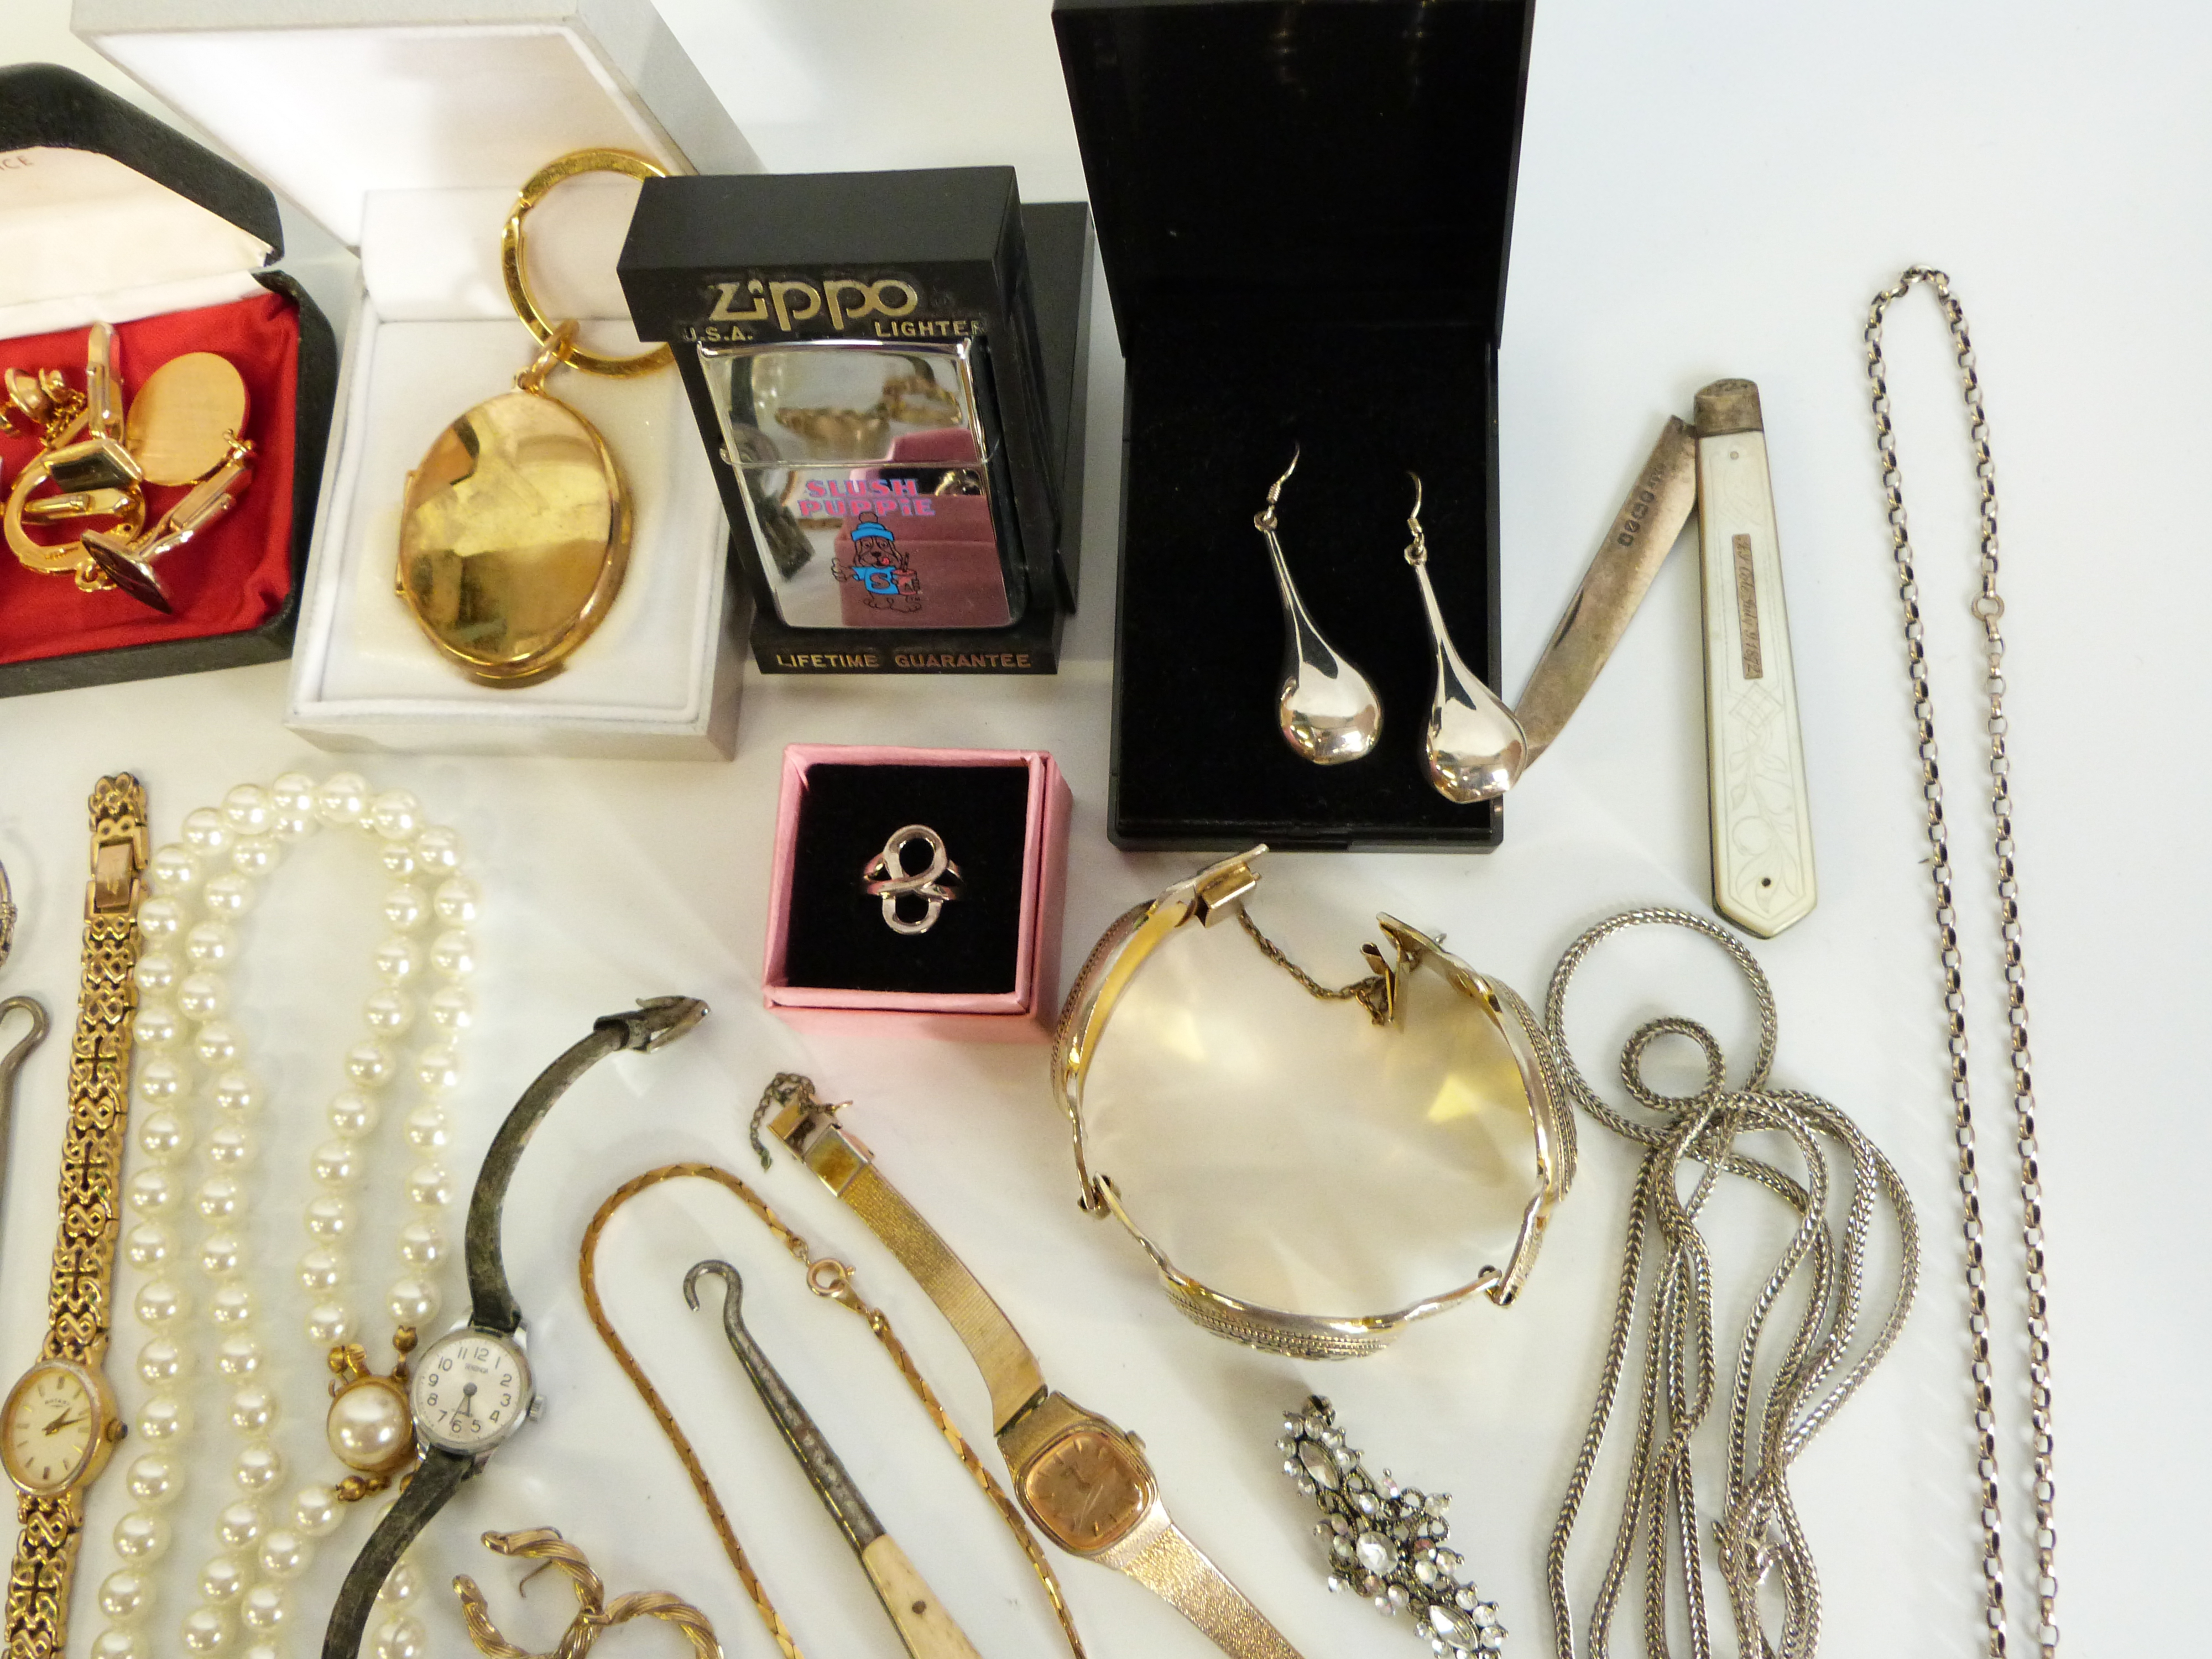 A collection of costume jewellery, watches, silver penknife, Zippo lighter, - Image 6 of 17